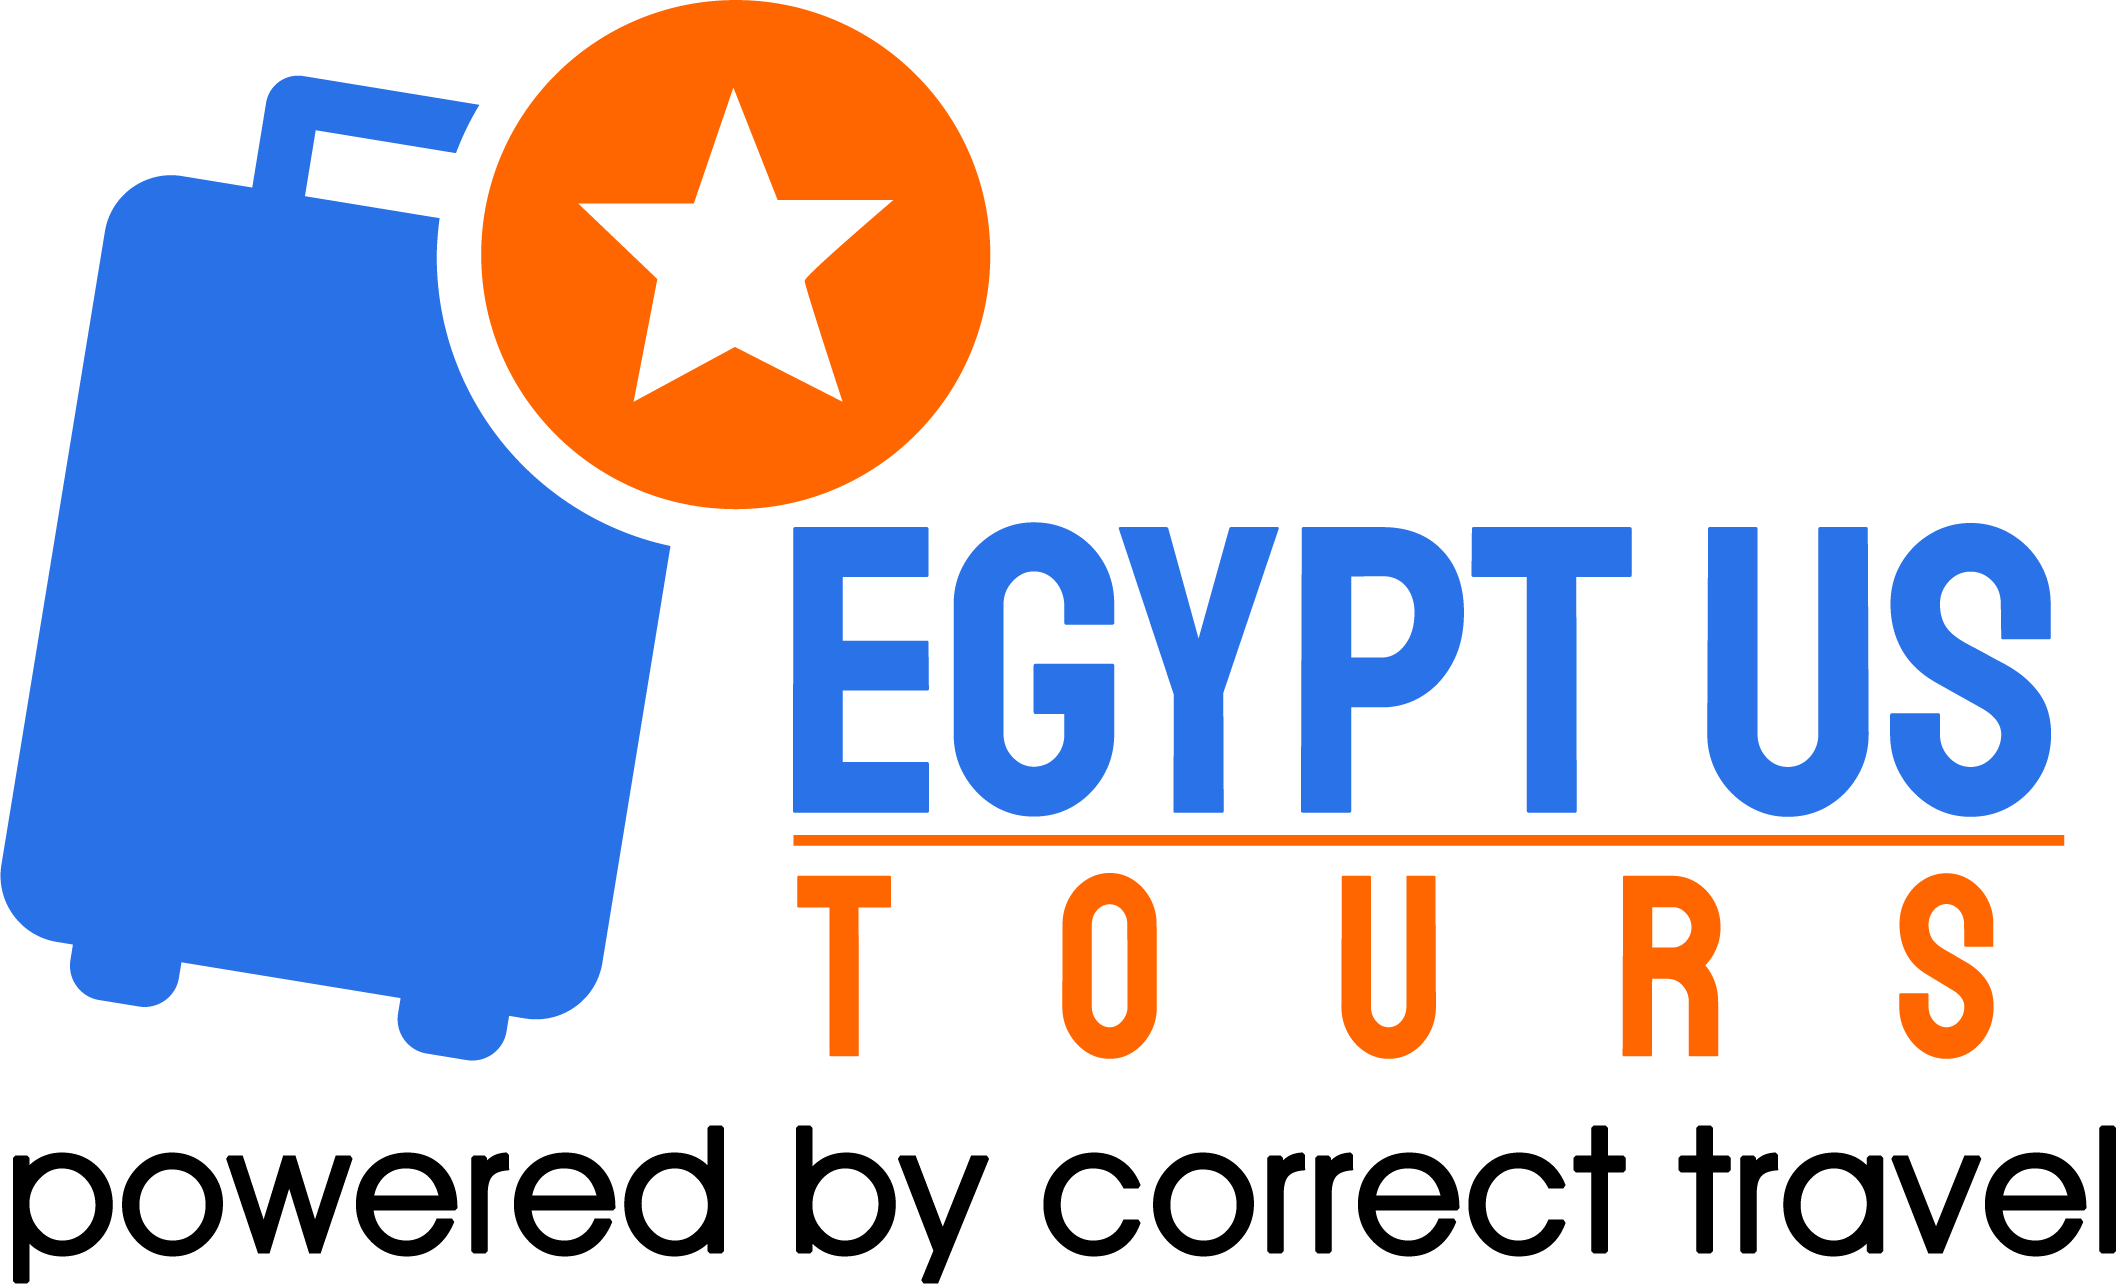 Egypt tours, Spend Your Holidays in Egypt, Best Travel Offers